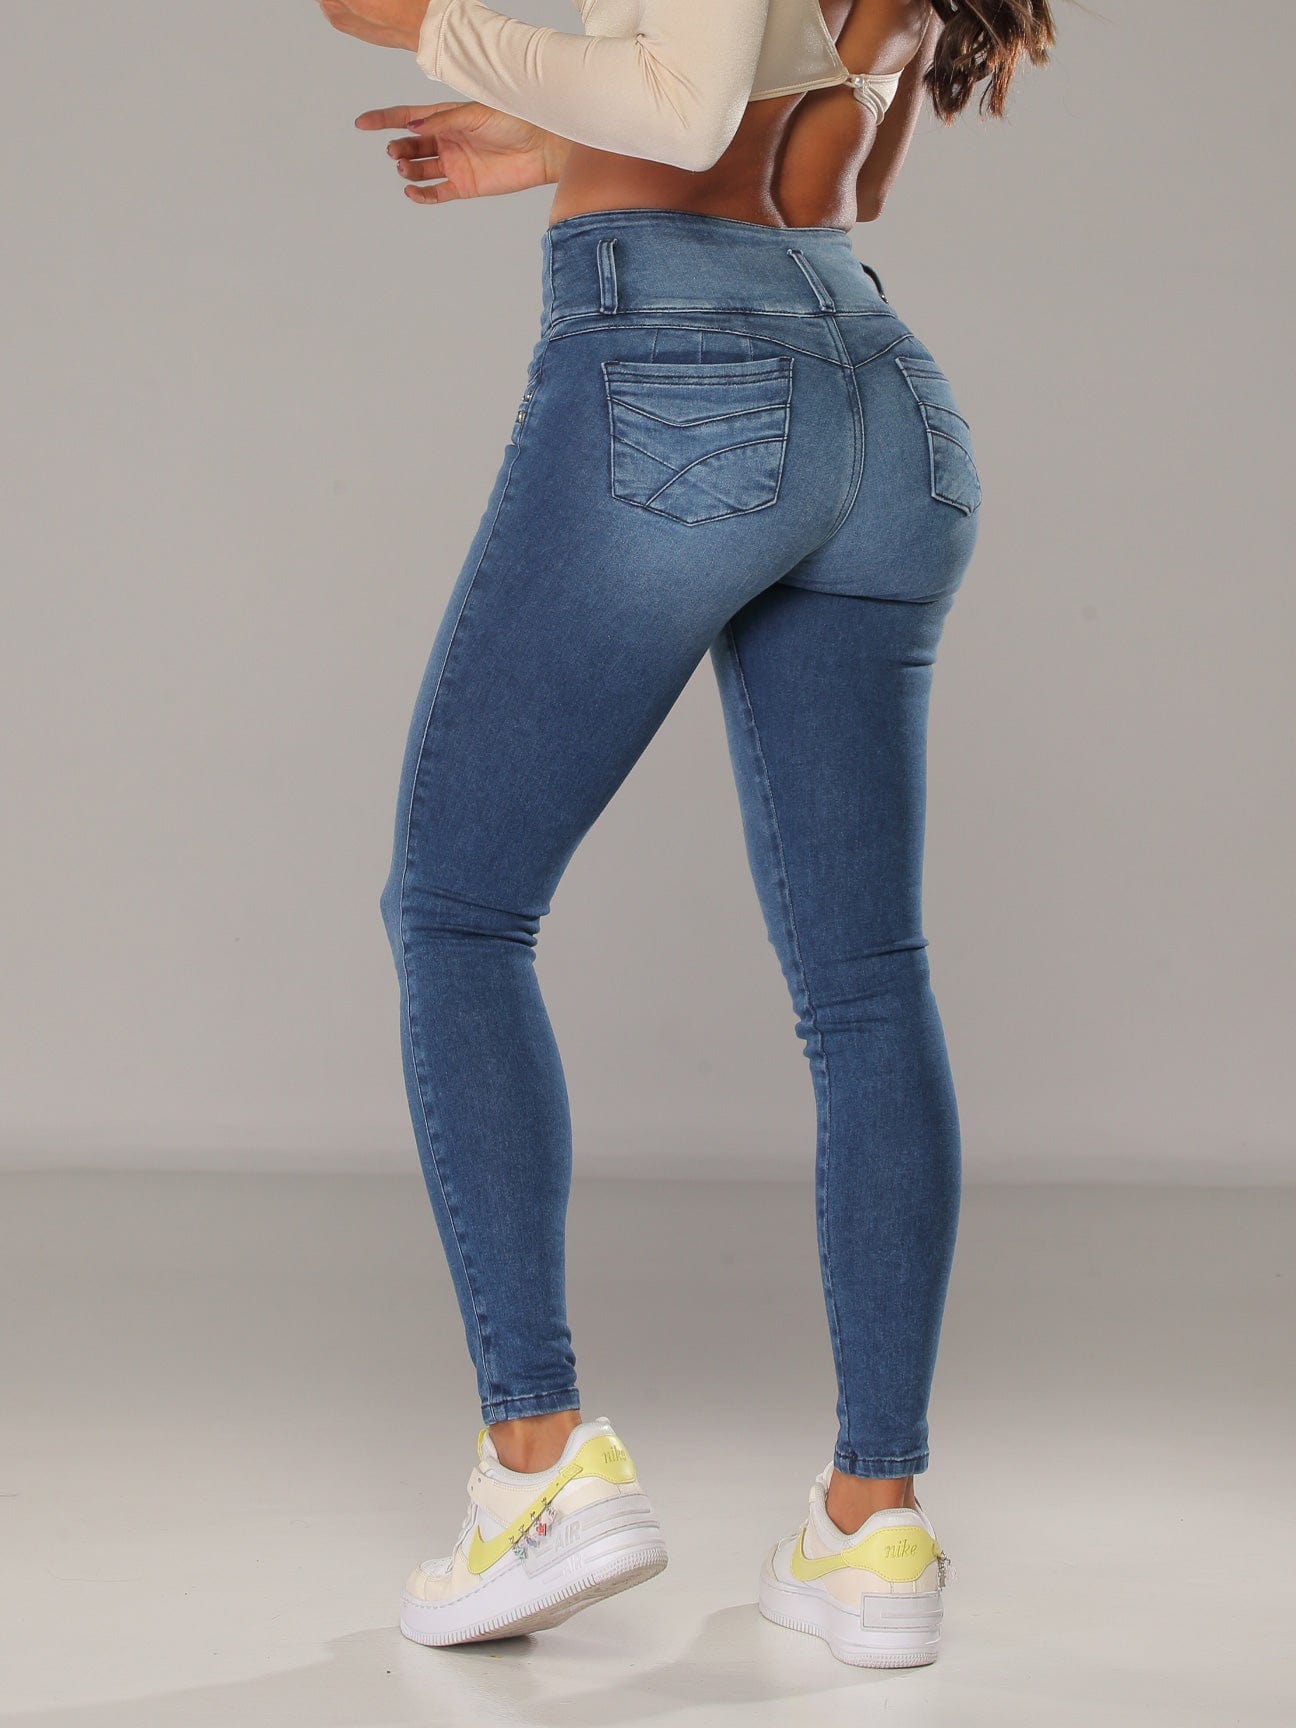 JEAN LEVANTACOLA / Buttlifting Jeans 009